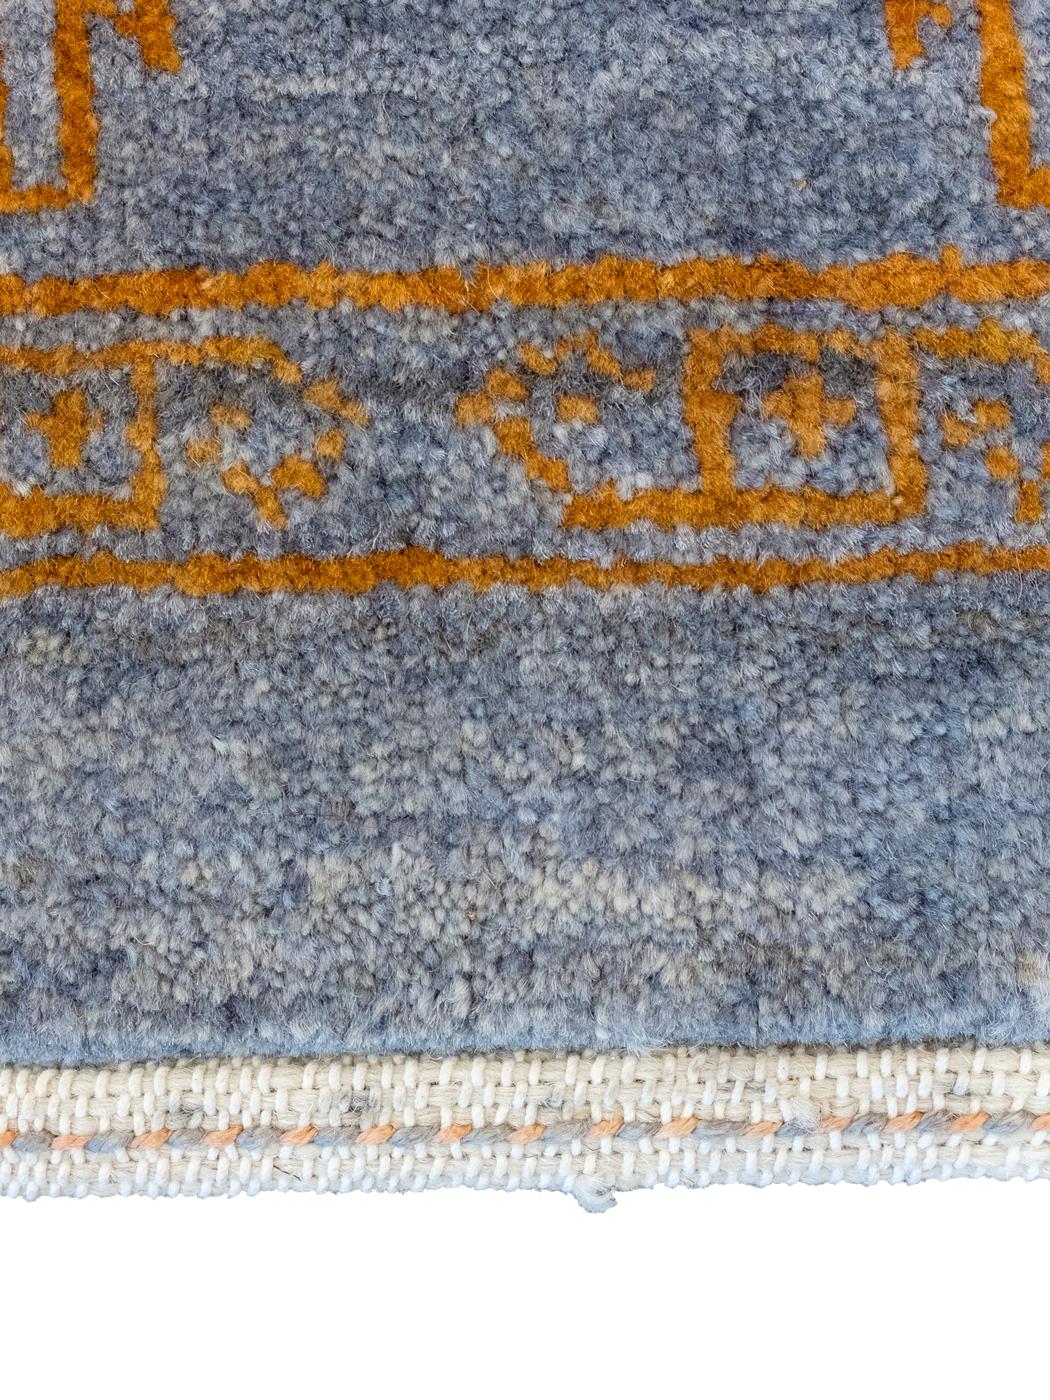 Orley Shabahang, Orange and Gray Contemporary Peacock Carpet, Wool, 9' x 12' In New Condition For Sale In New York, NY